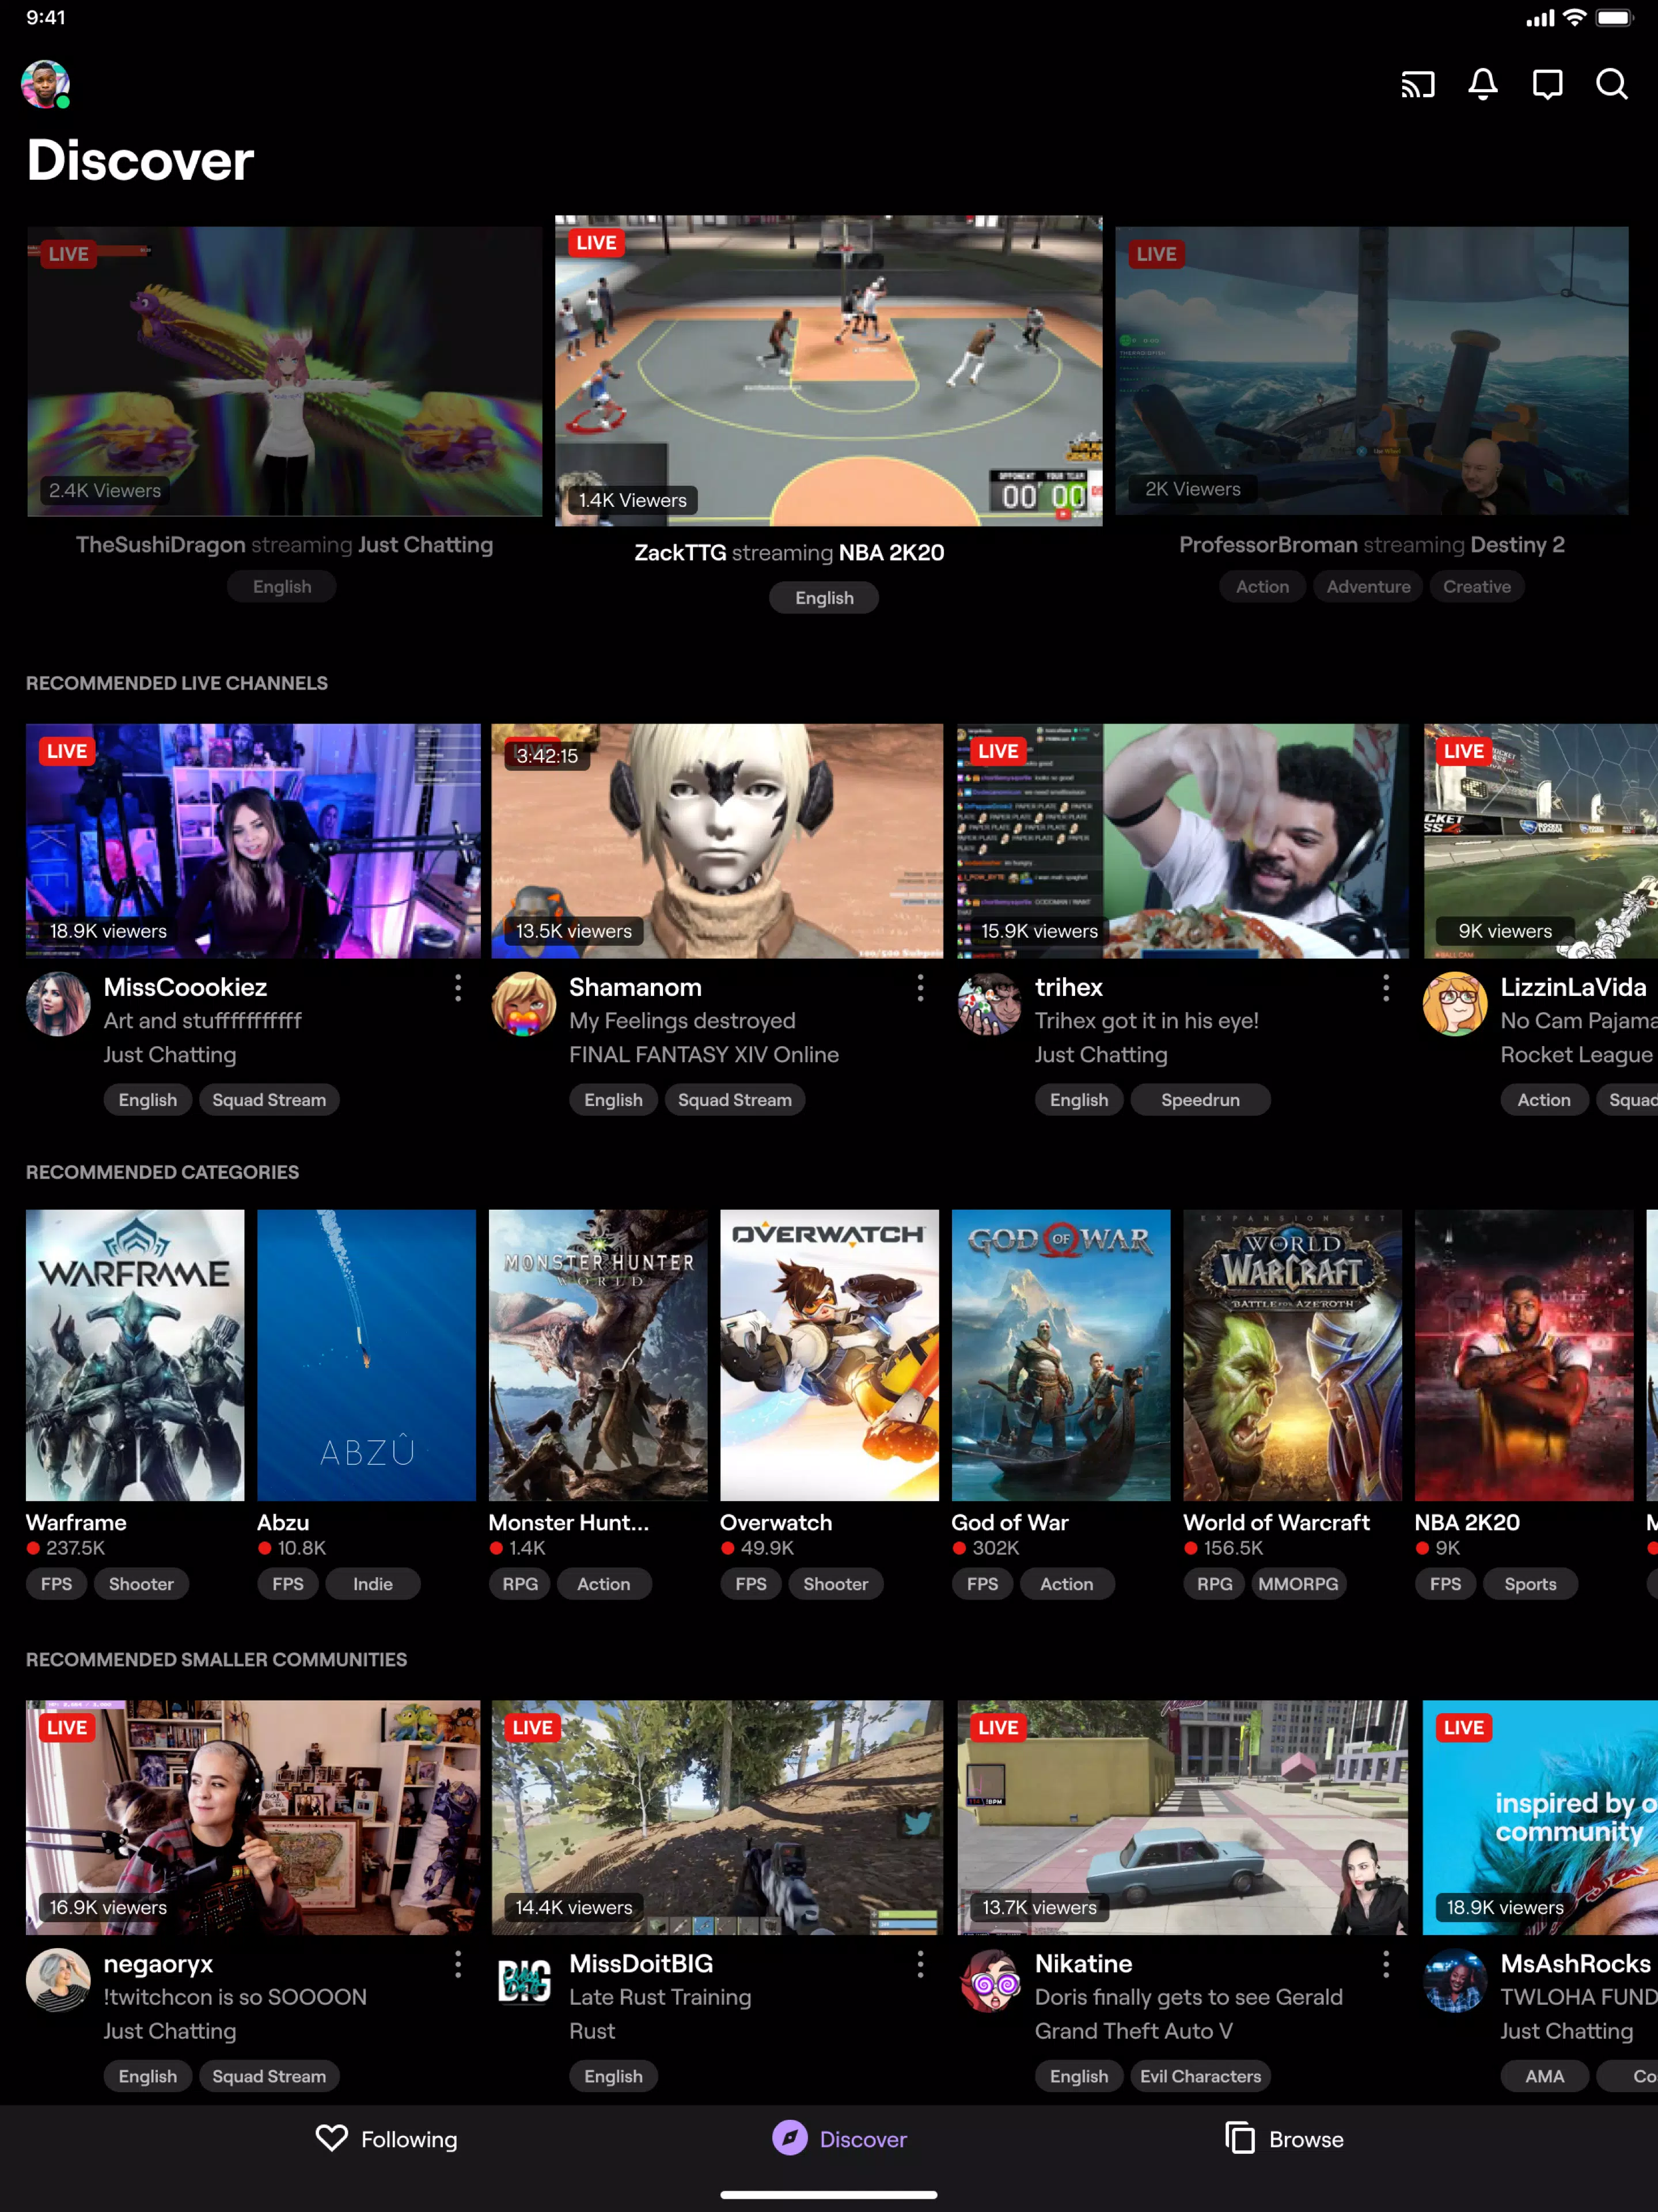 Twitch for Android - Download the APK from Uptodown